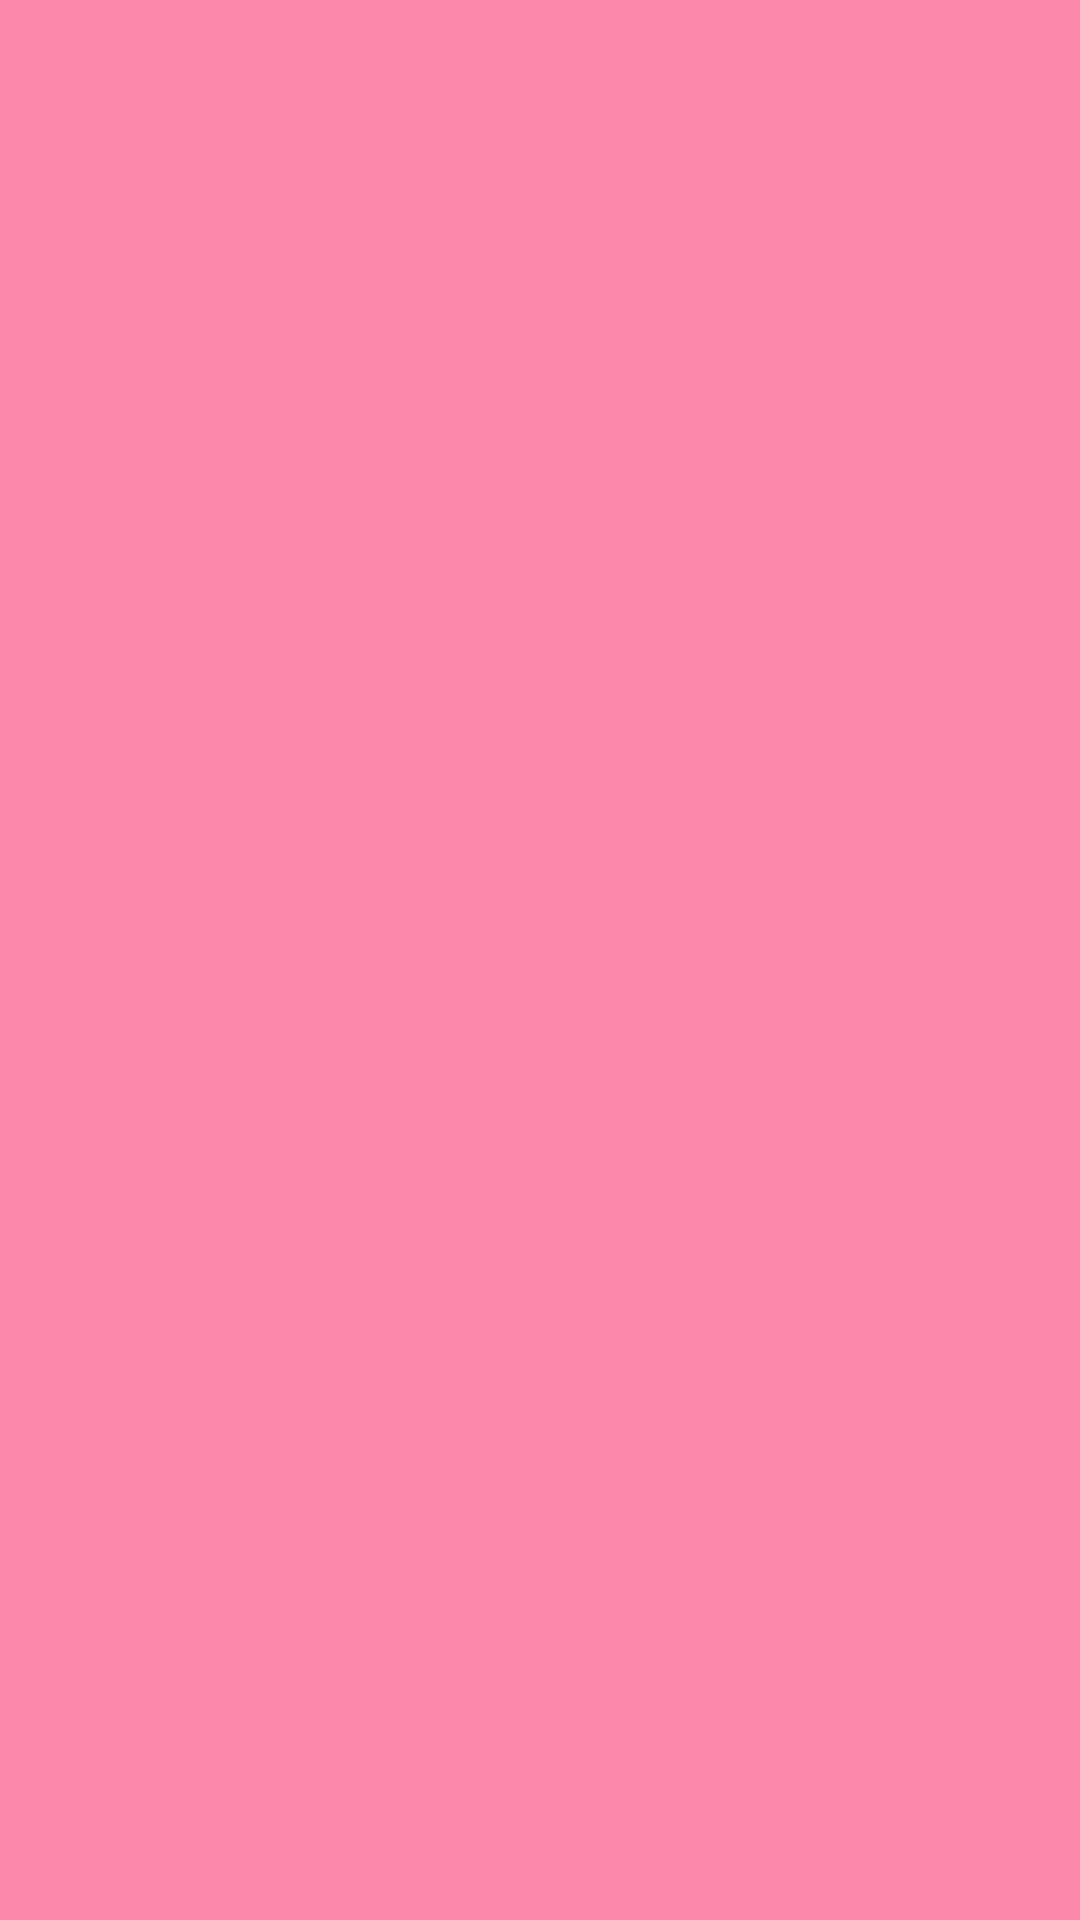 1080x1920 Tickle Me Pink Solid Color Background